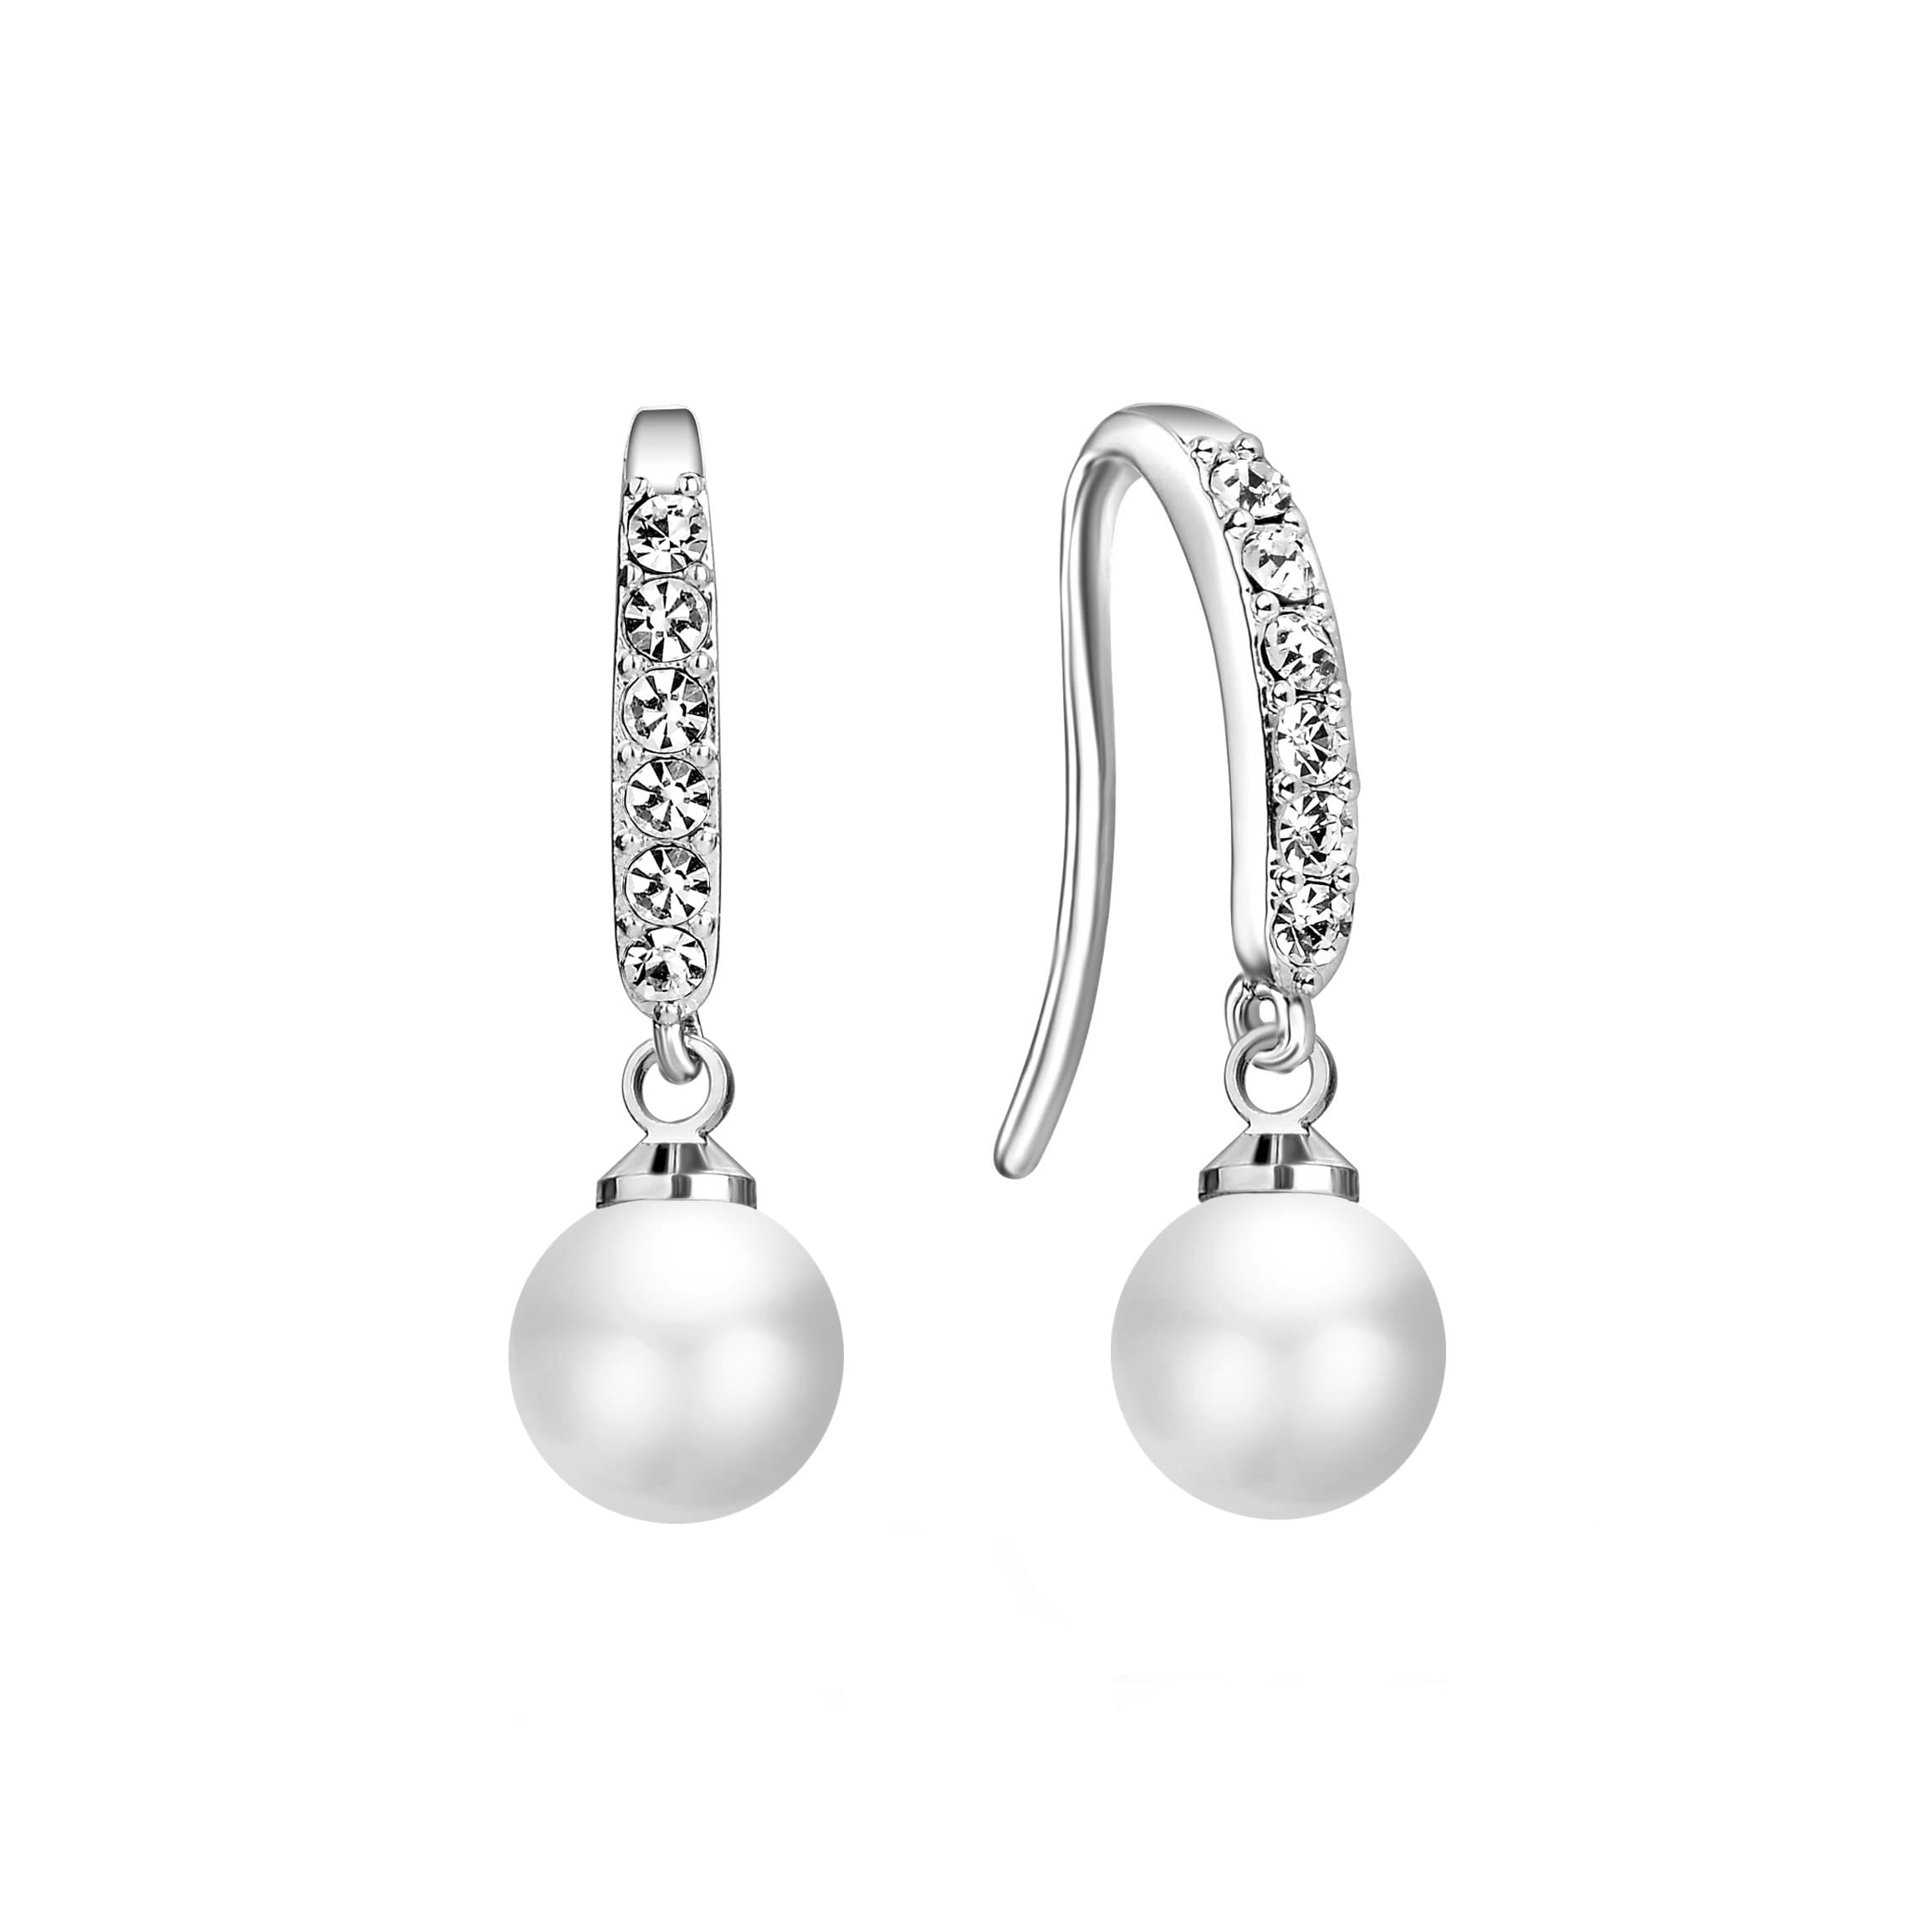 Silver Plated Pearl Drop Earrings Created with Zircondia® Crystals by Philip Jones Jewellery